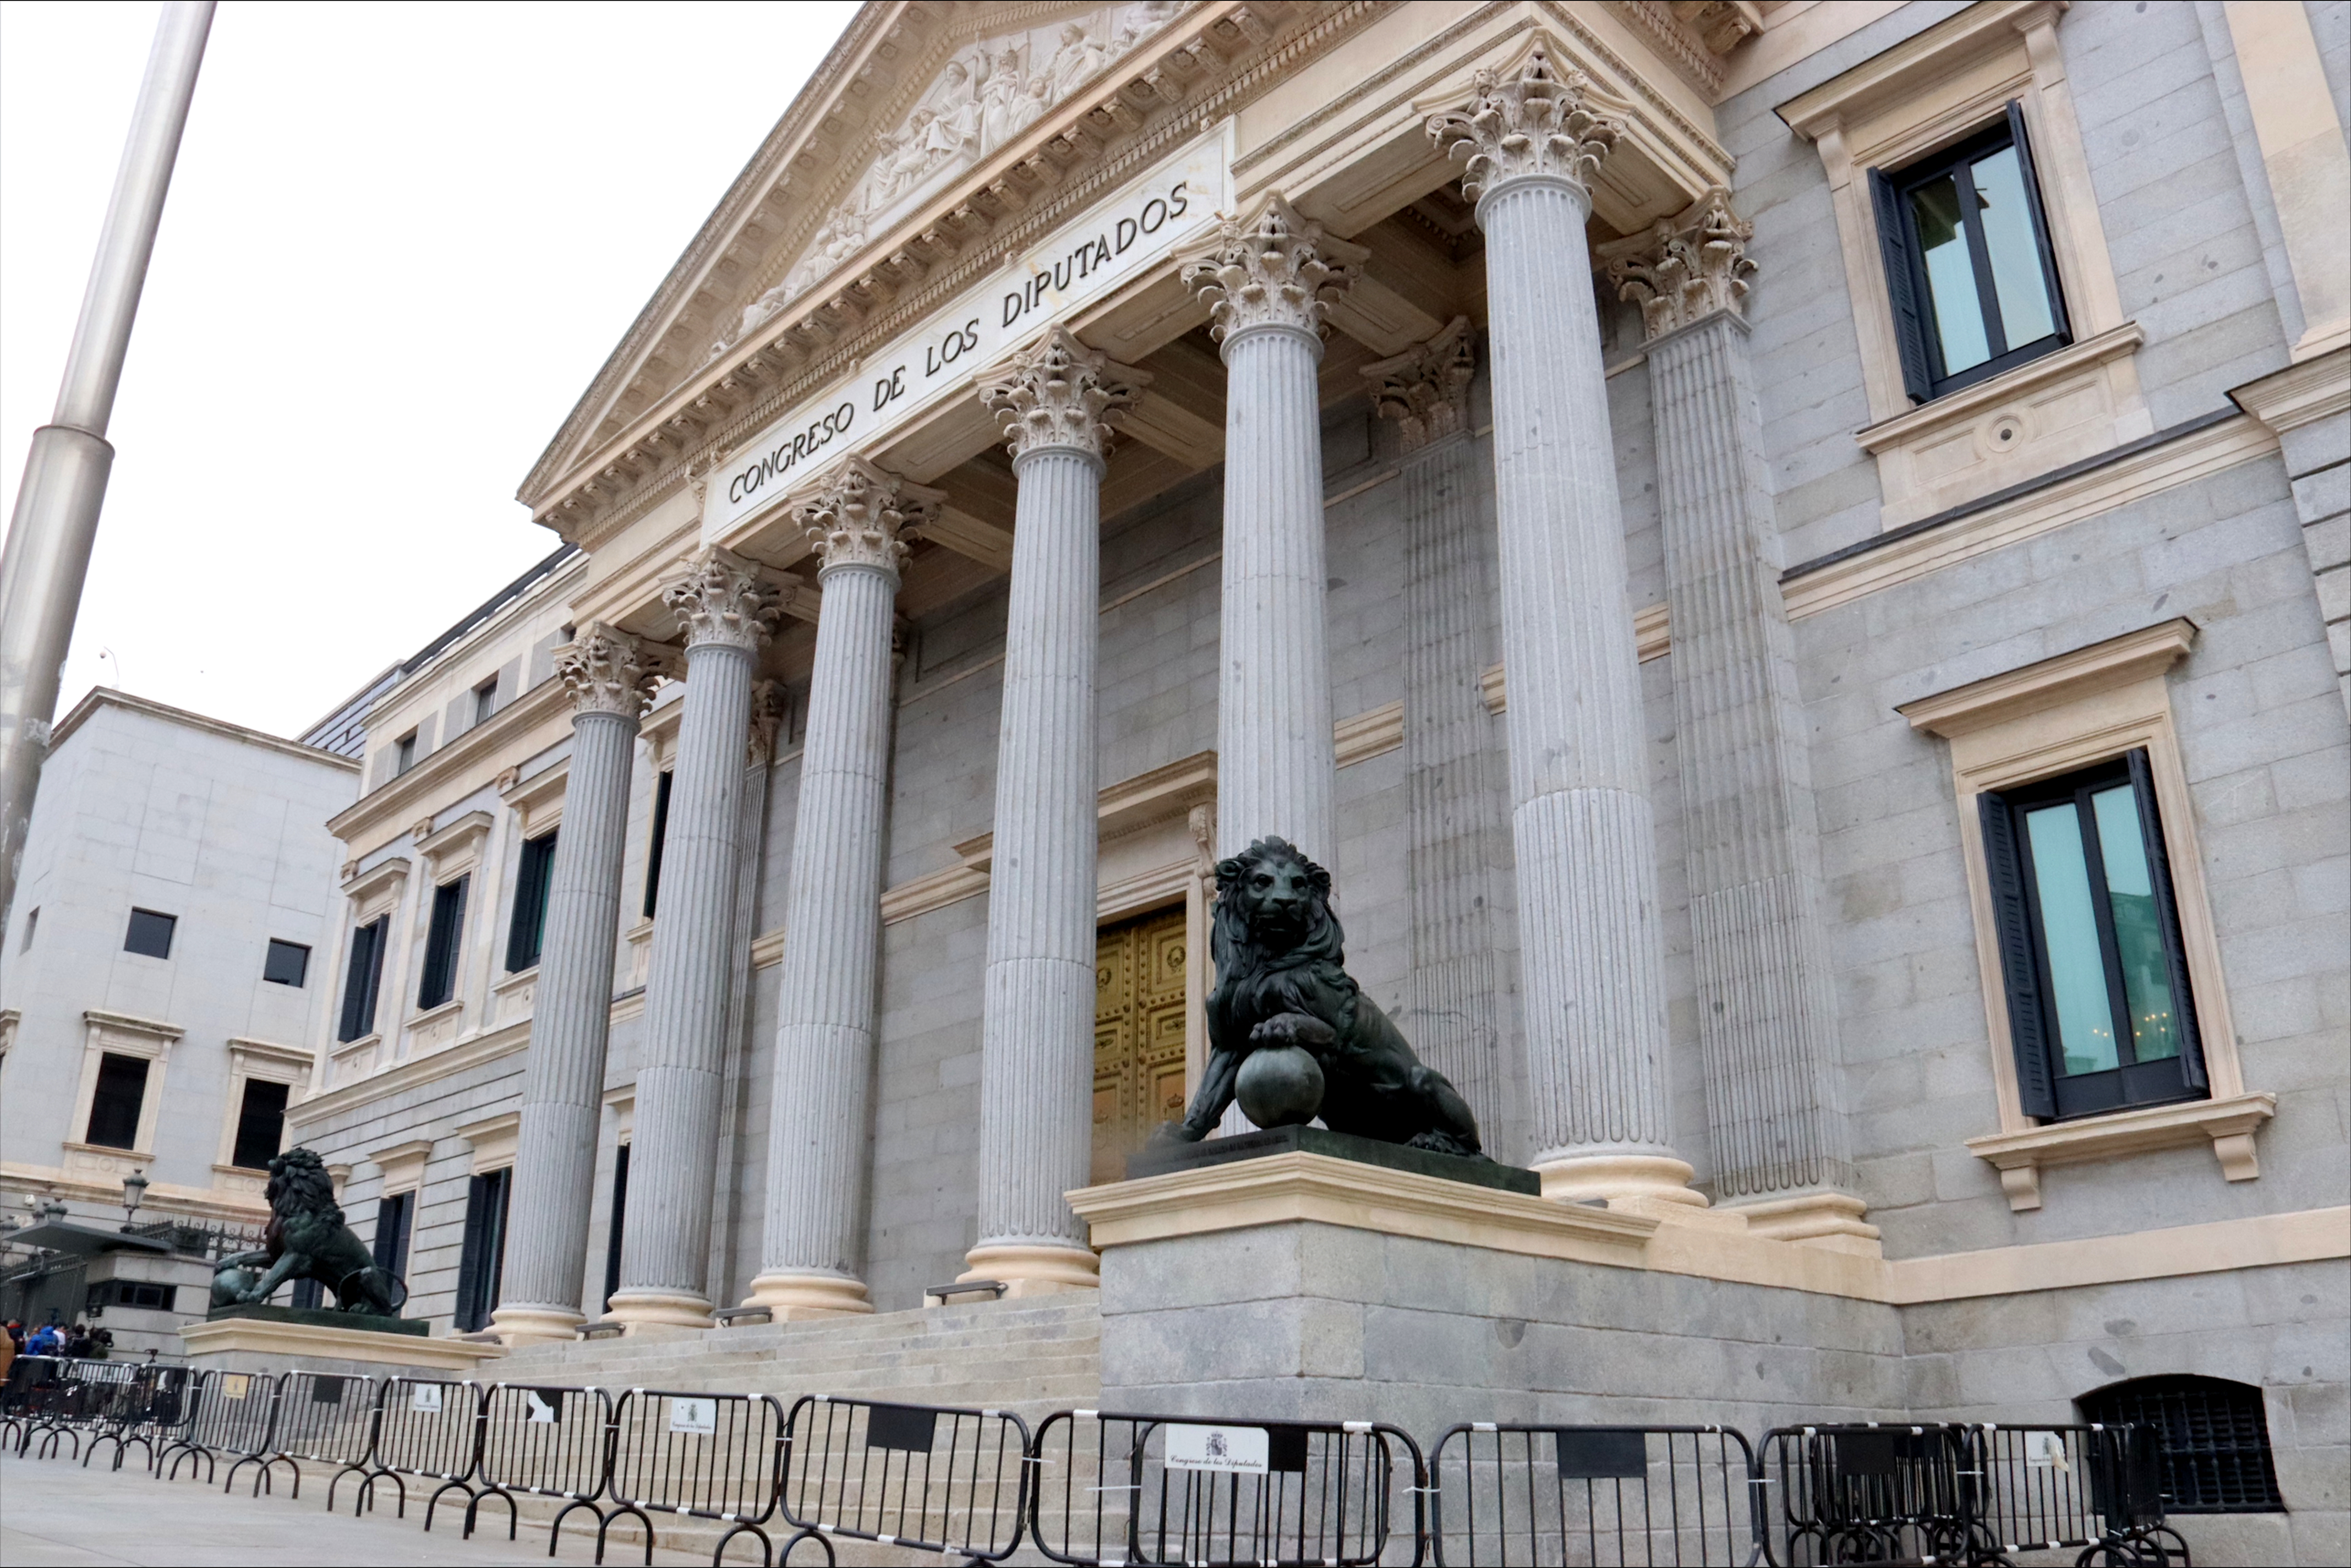 Spain's Congress façade with two statues representing lions on each side of the main door